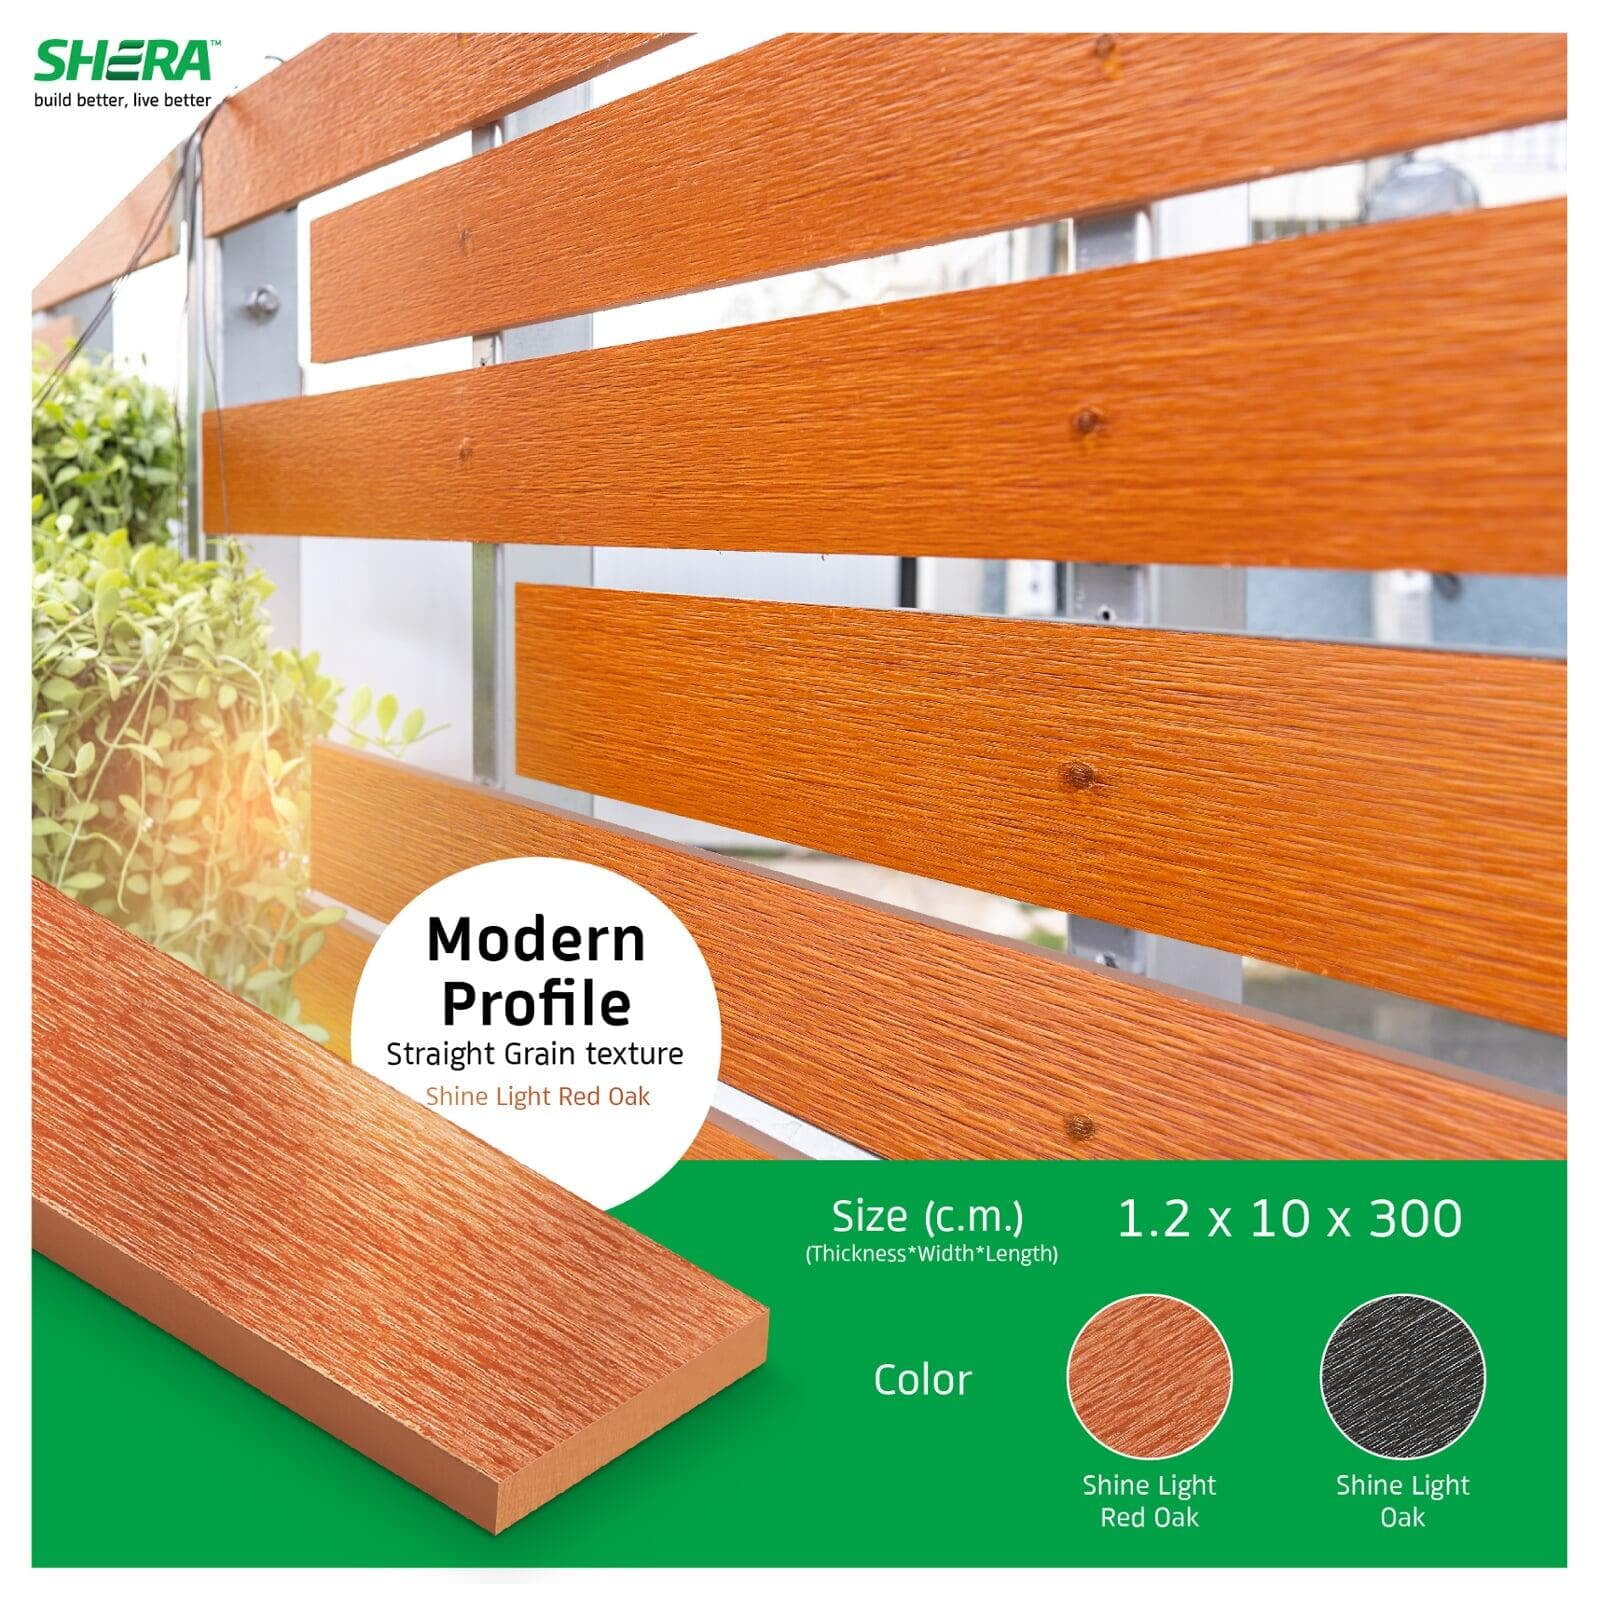 SHERA Fence fibre cement fence material